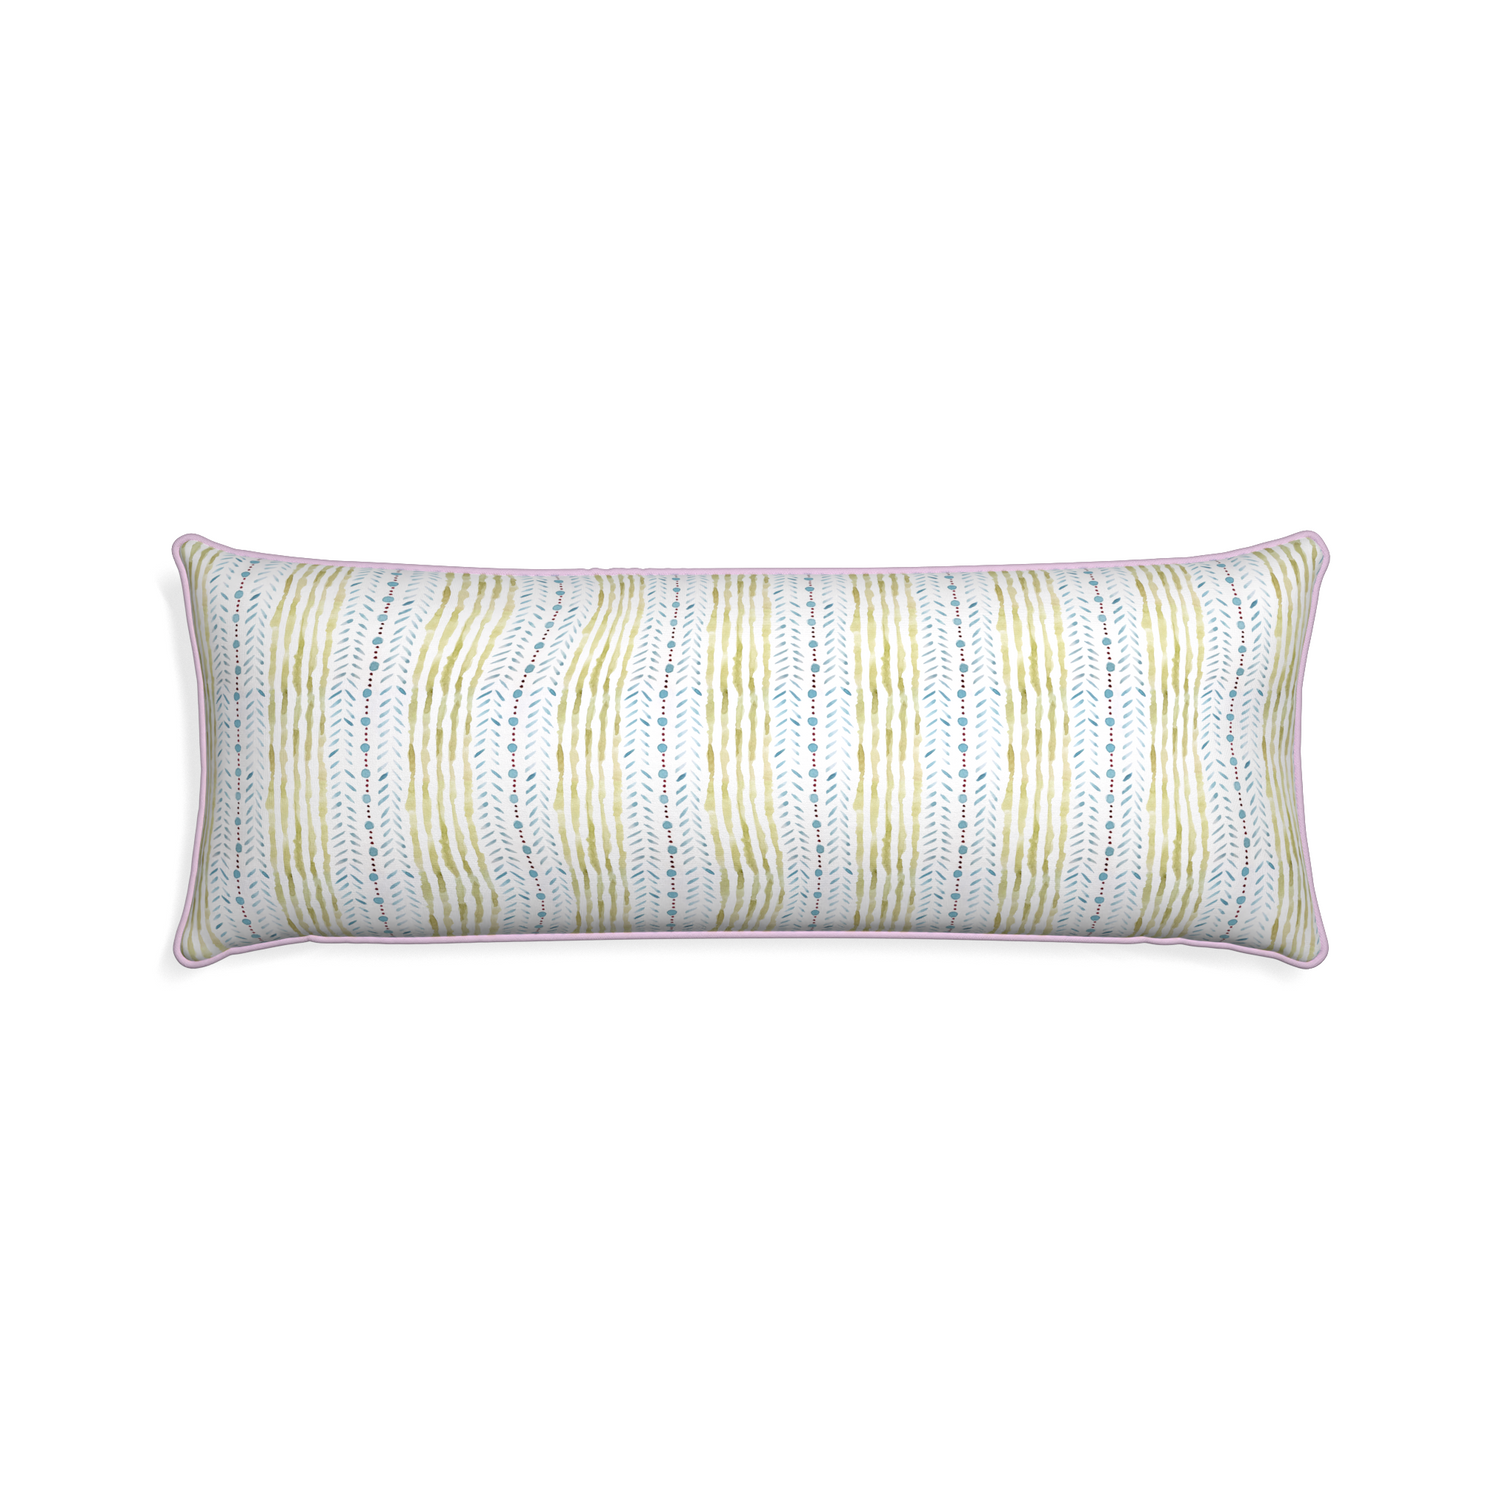 Xl-lumbar julia custom blue & green stripedpillow with l piping on white background